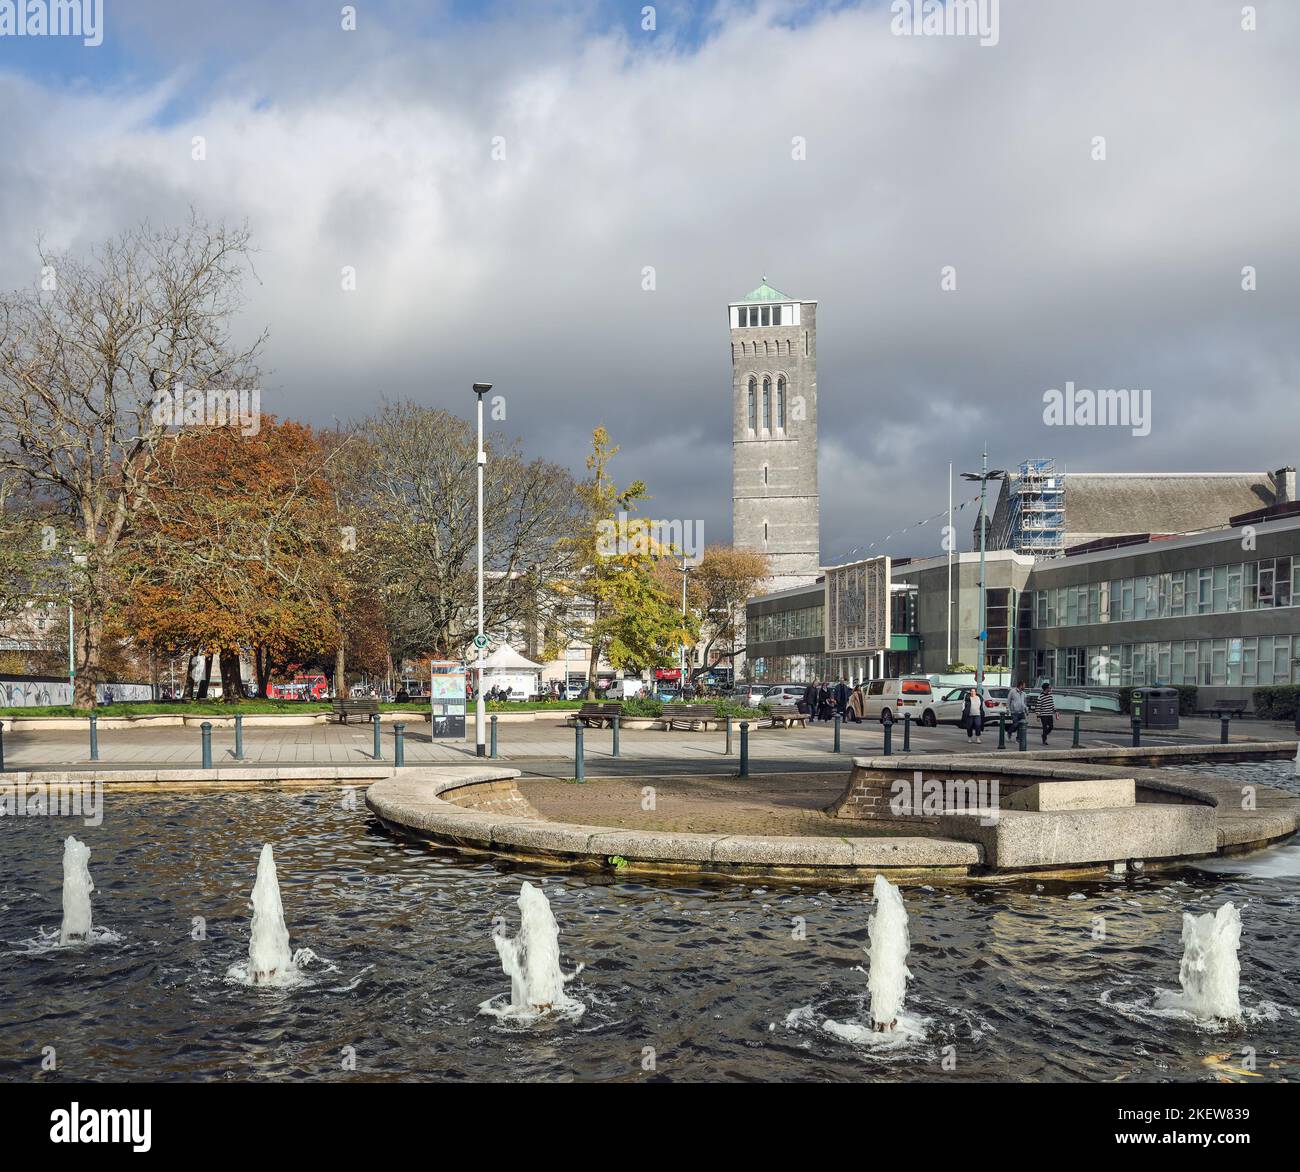 Almost £2 million (£1,994,638) awarded to Plymouth as a part of a national high street project overseen by Historic England. Together with the nearby Stock Photo